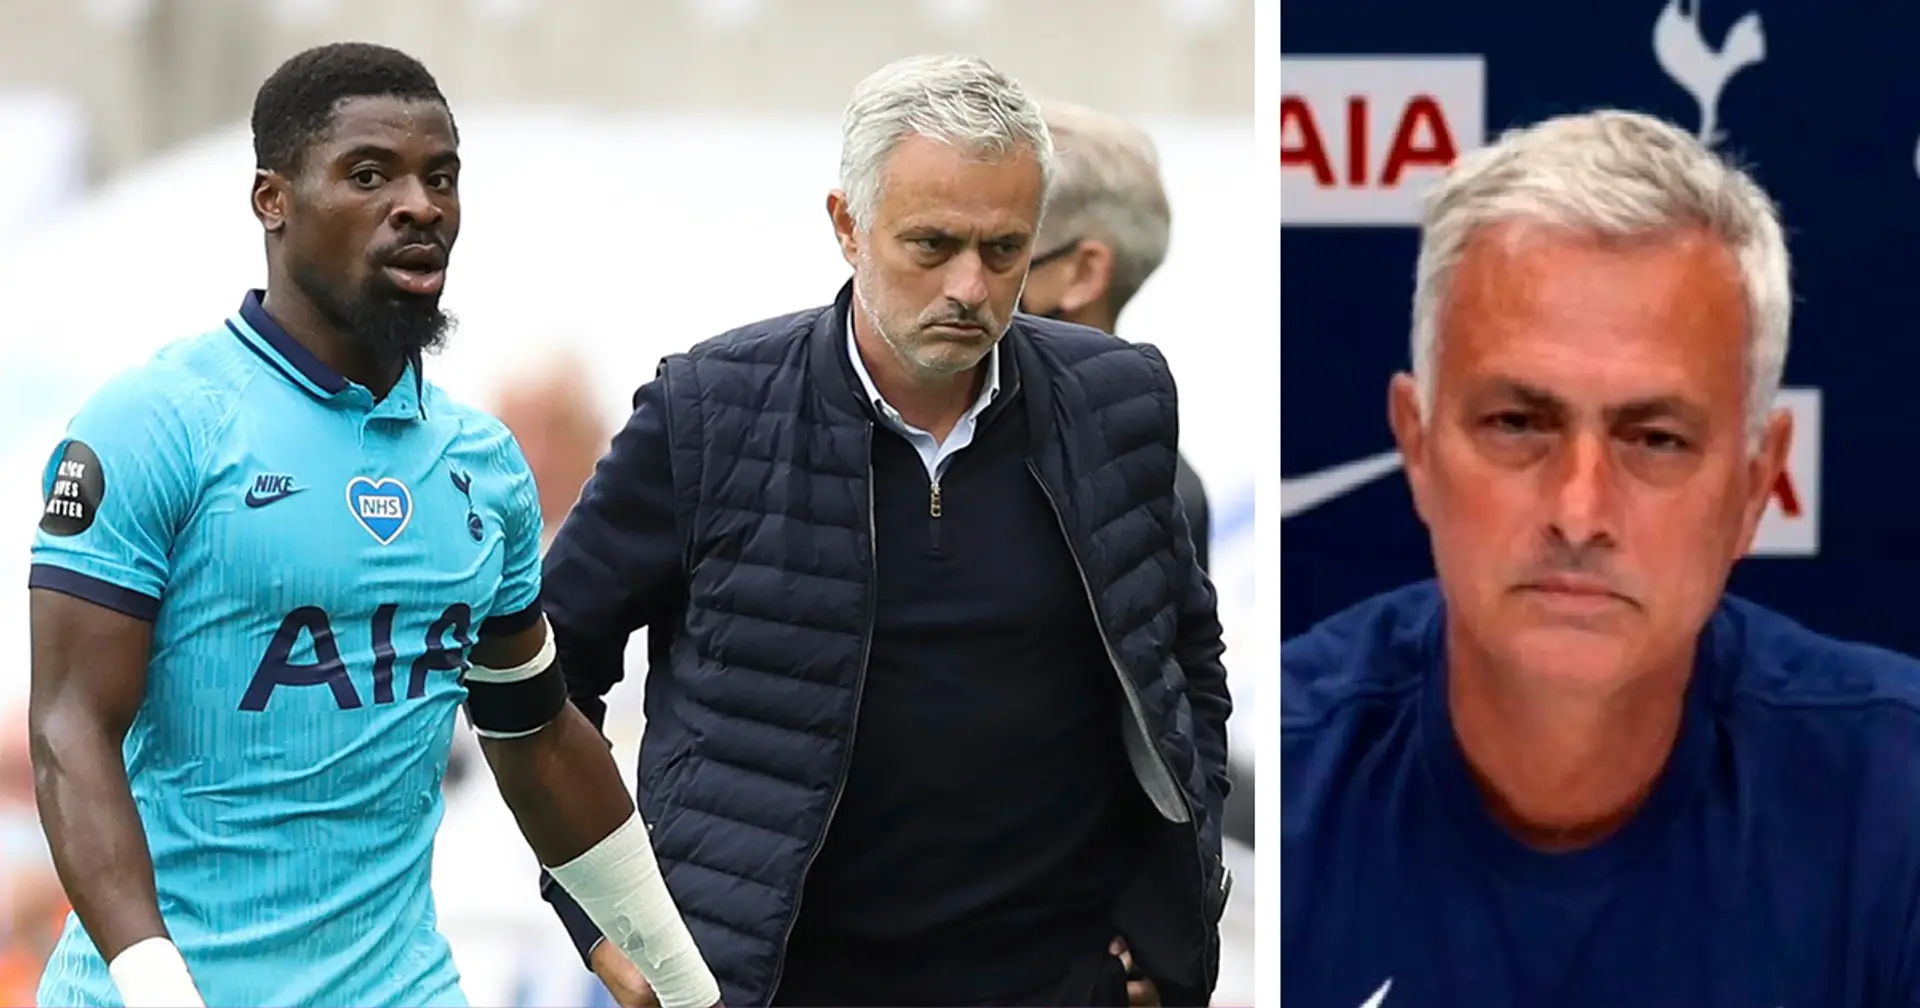 Jose Mourinho reveals Serge Aurier asked to play against Newcastle 2 days after his brother's death